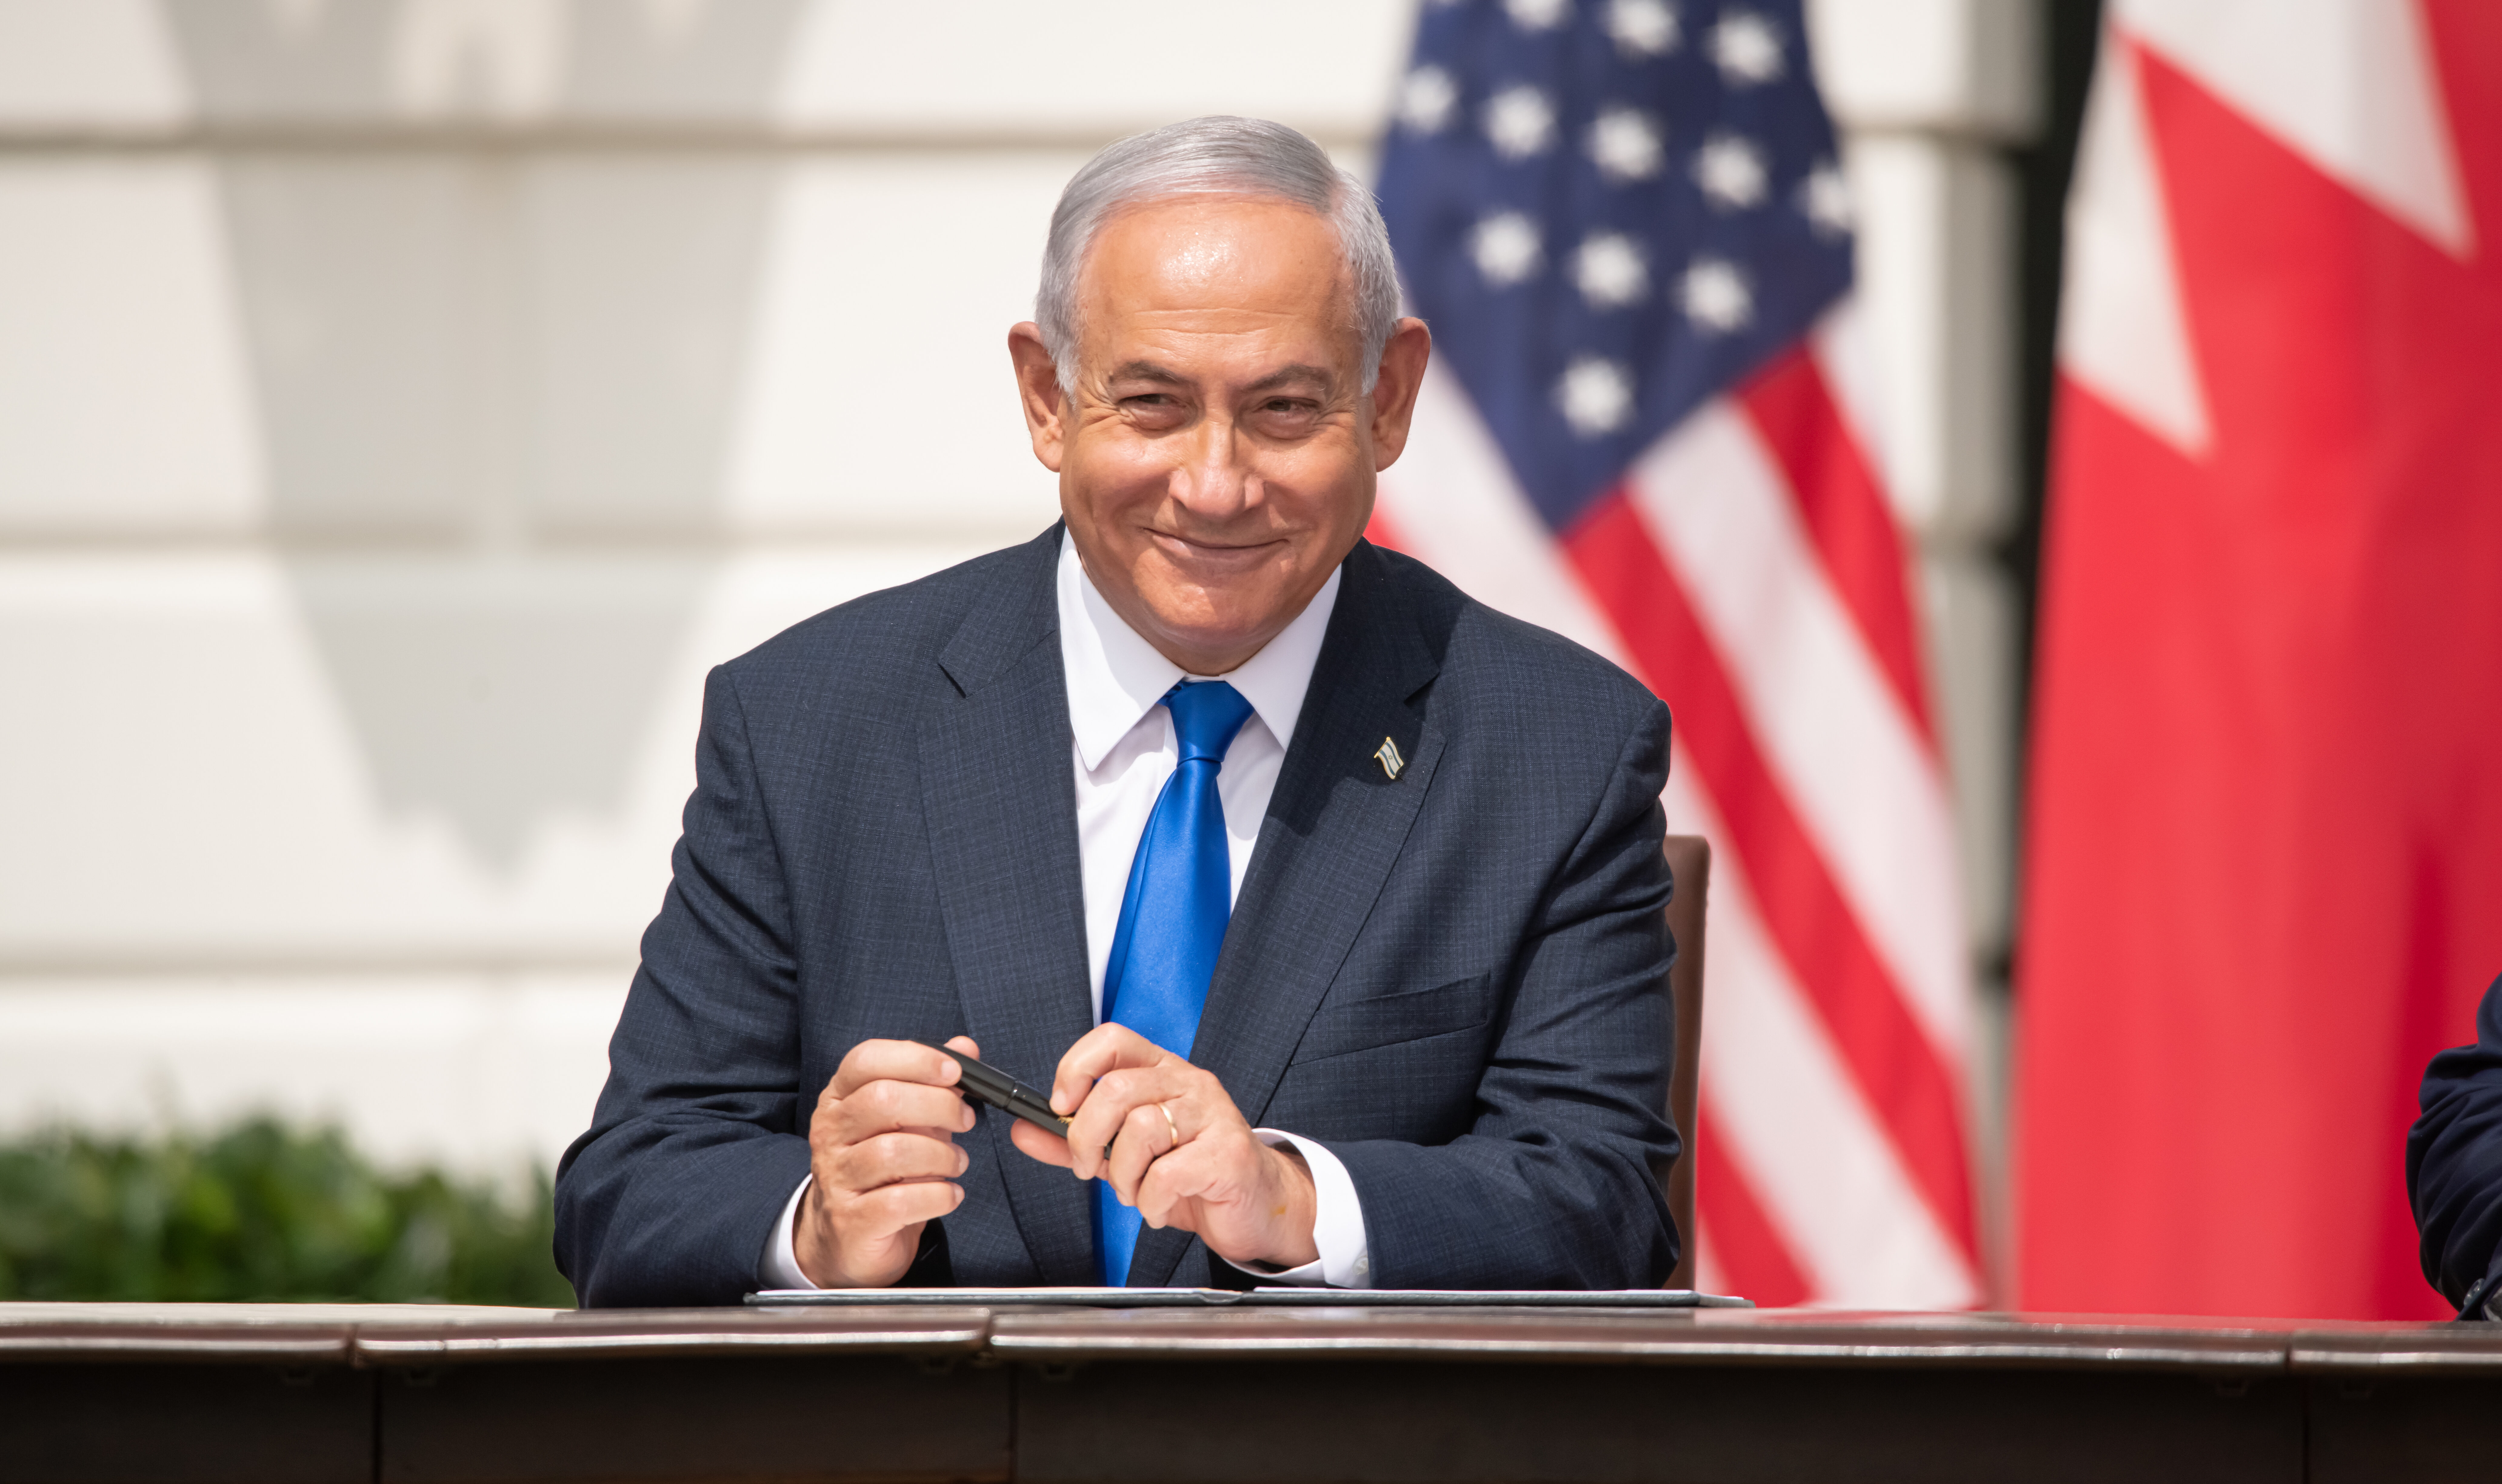 The GOP’s Bibi-Backing Could Backfire